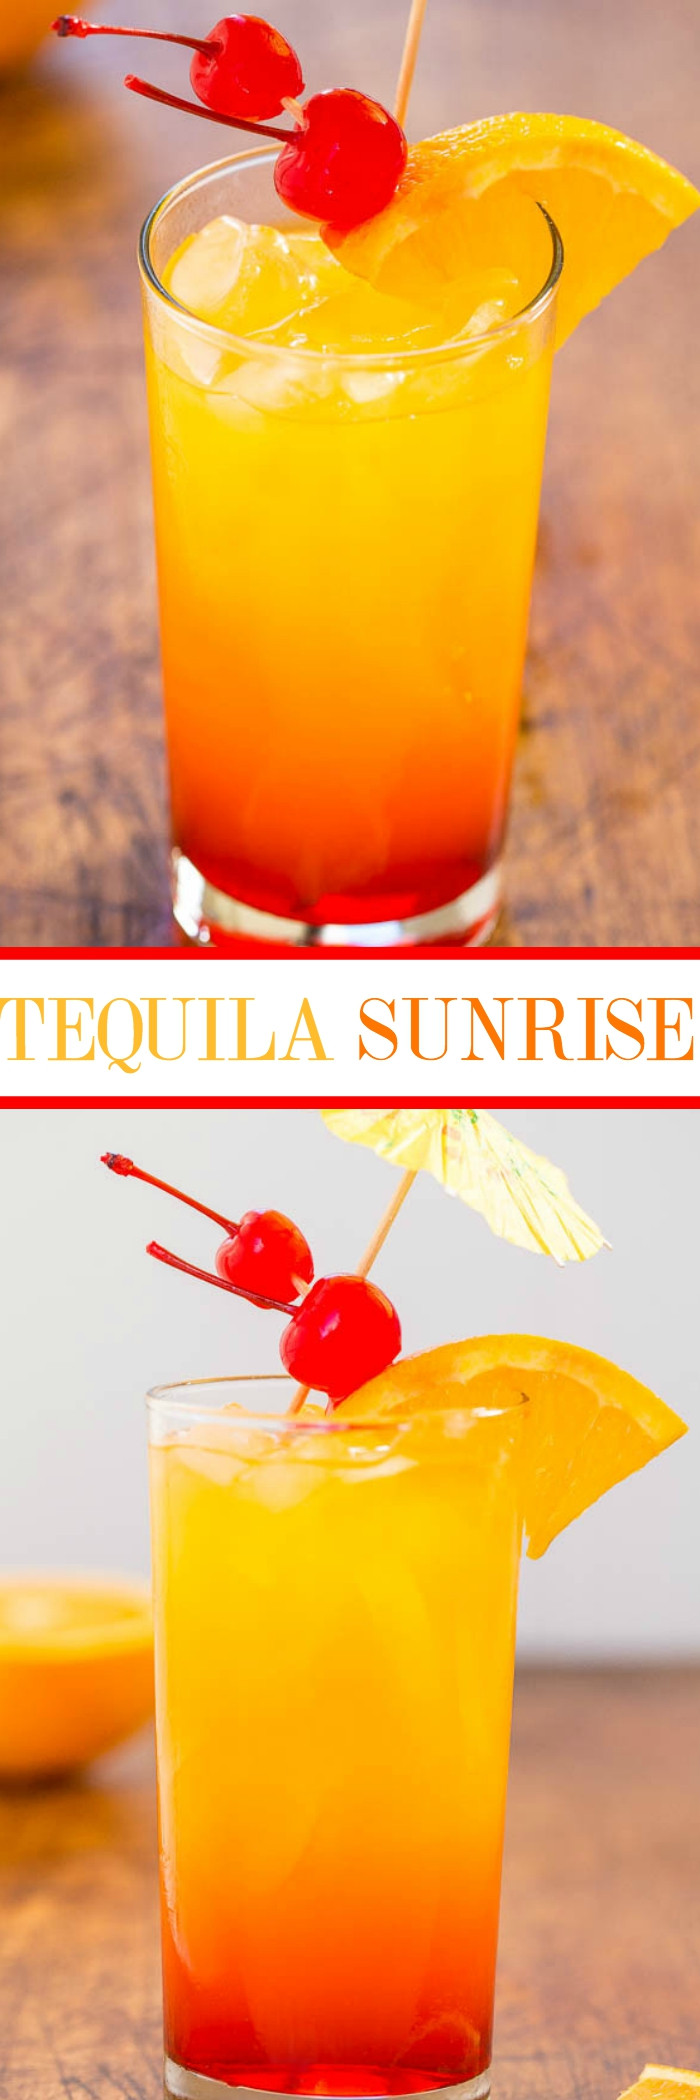 Easy Mixed Drinks With Tequila
 Tequila Sunrise Easy Tequila Mixed Drink